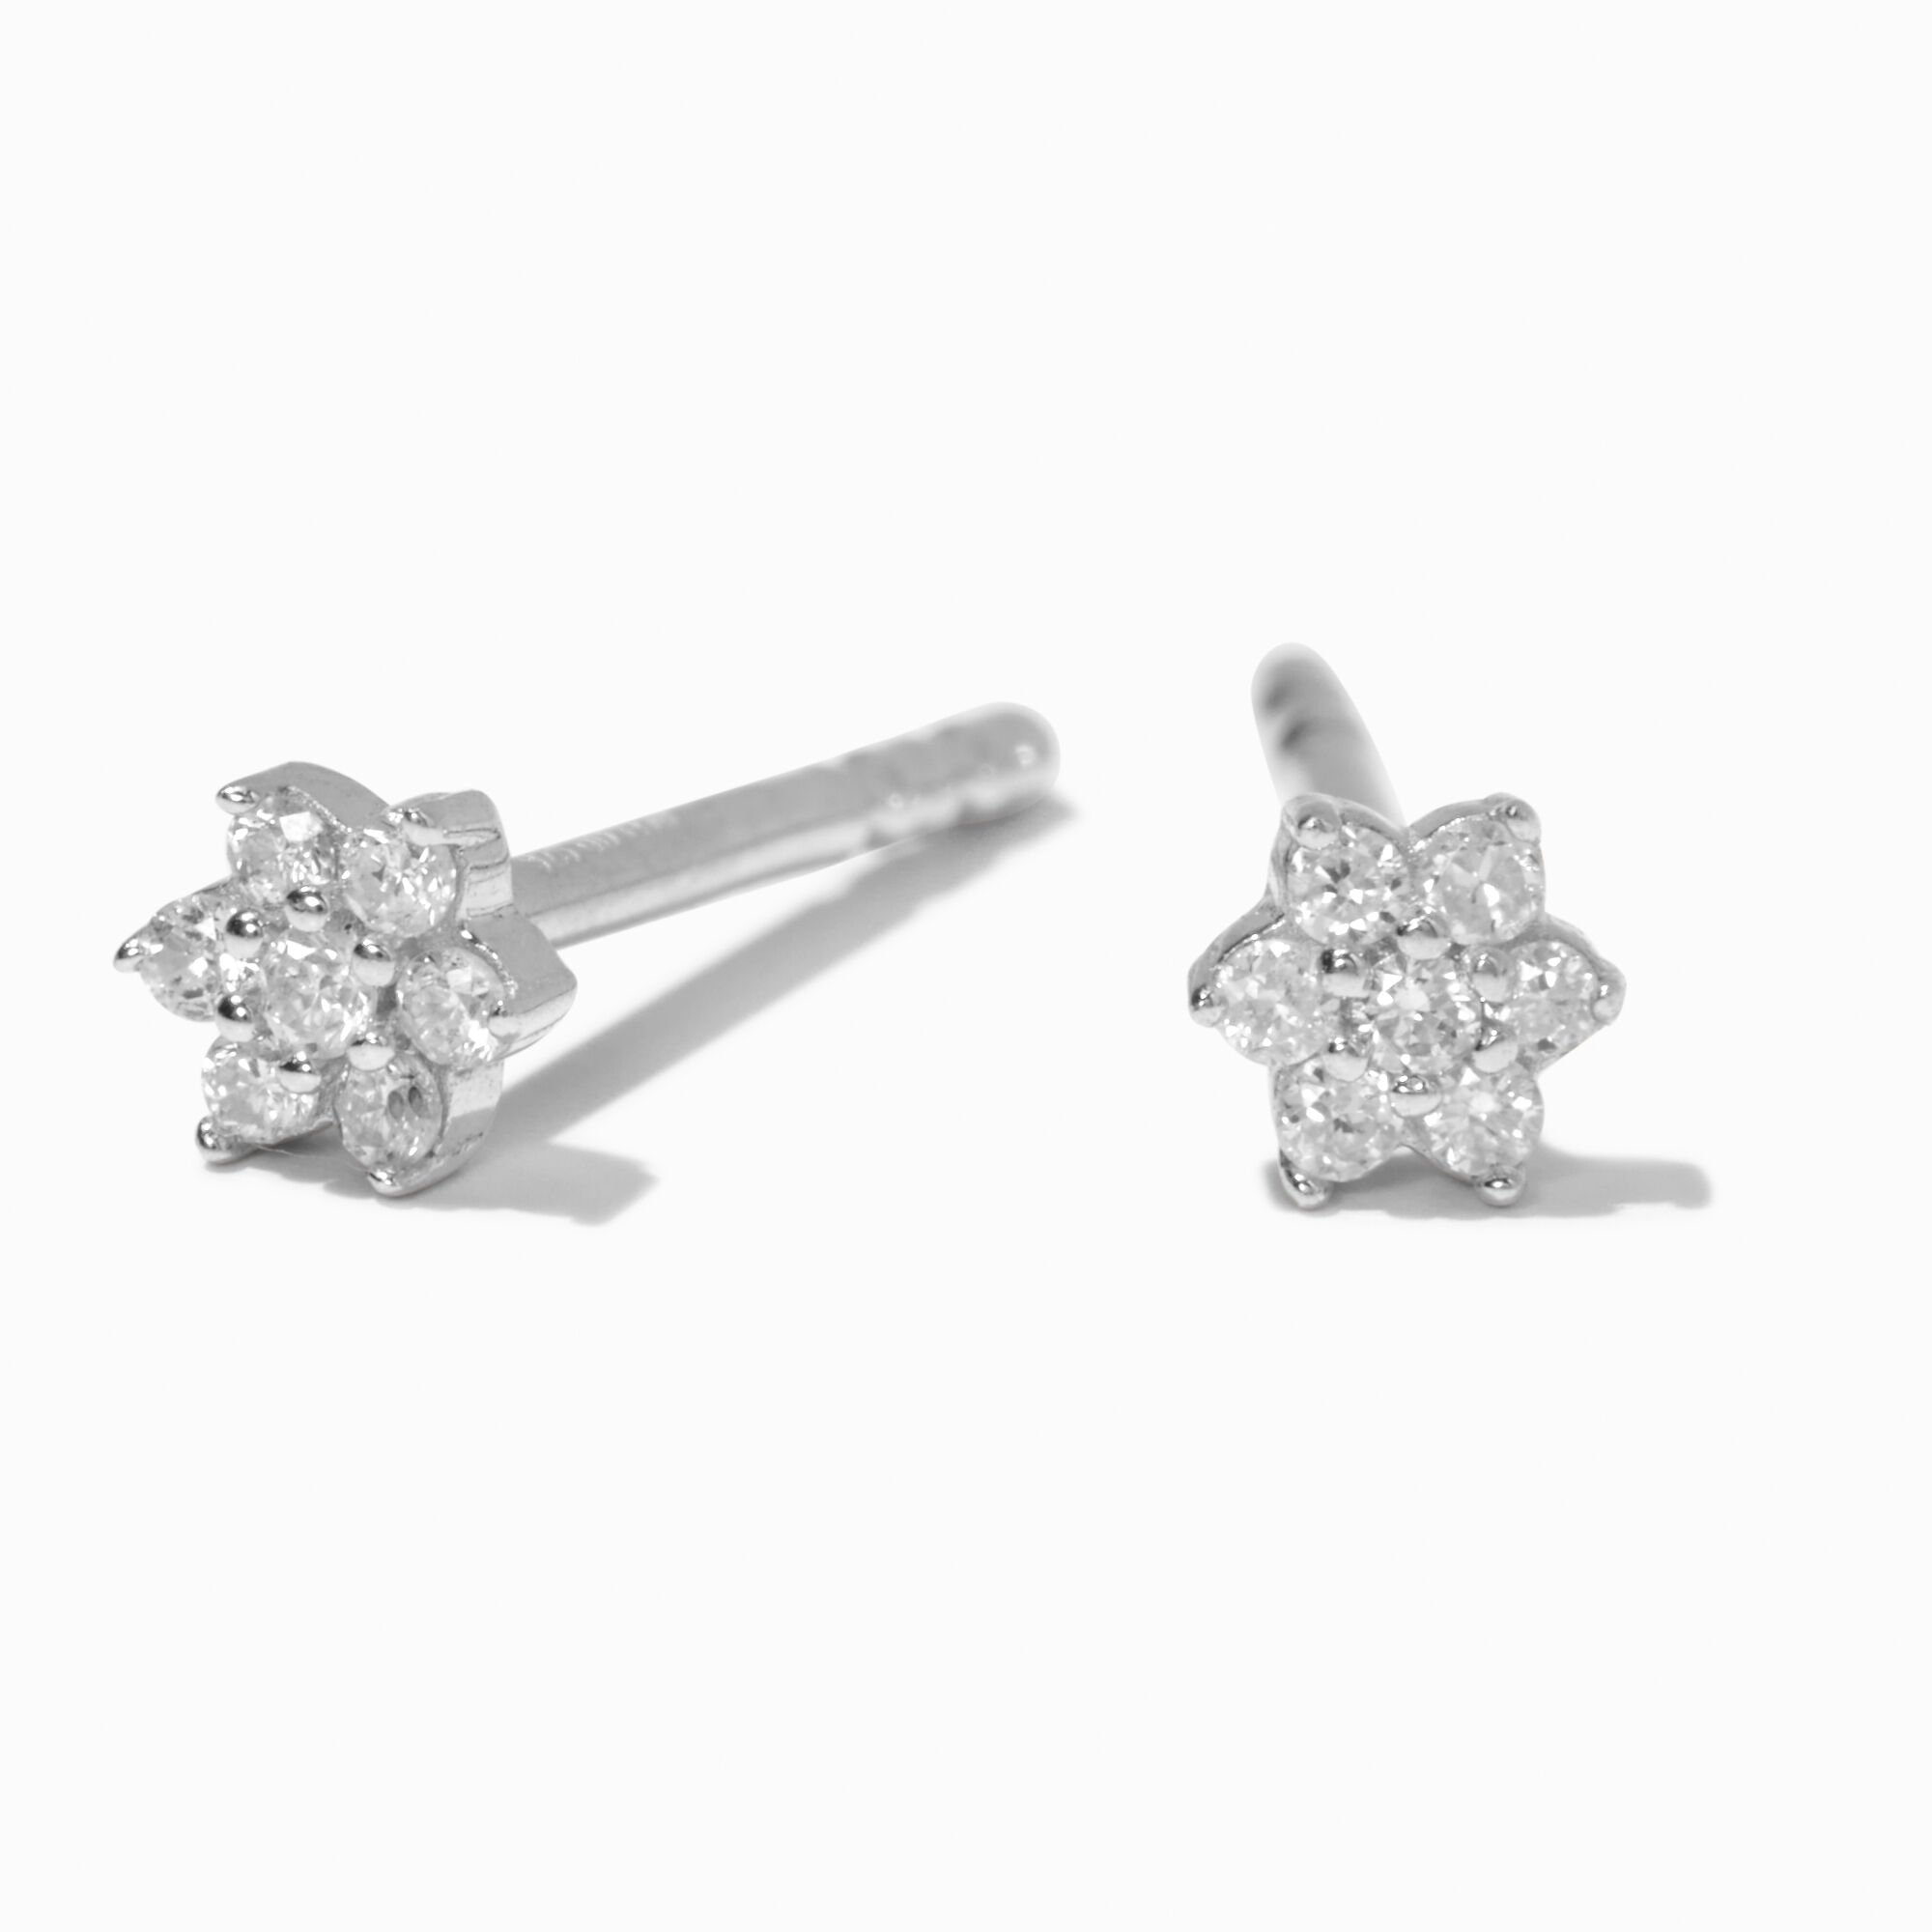 View C Luxe By Claires 110 Ct Tw Laboratory Grown Diamond Flower Stud Earrings Silver information